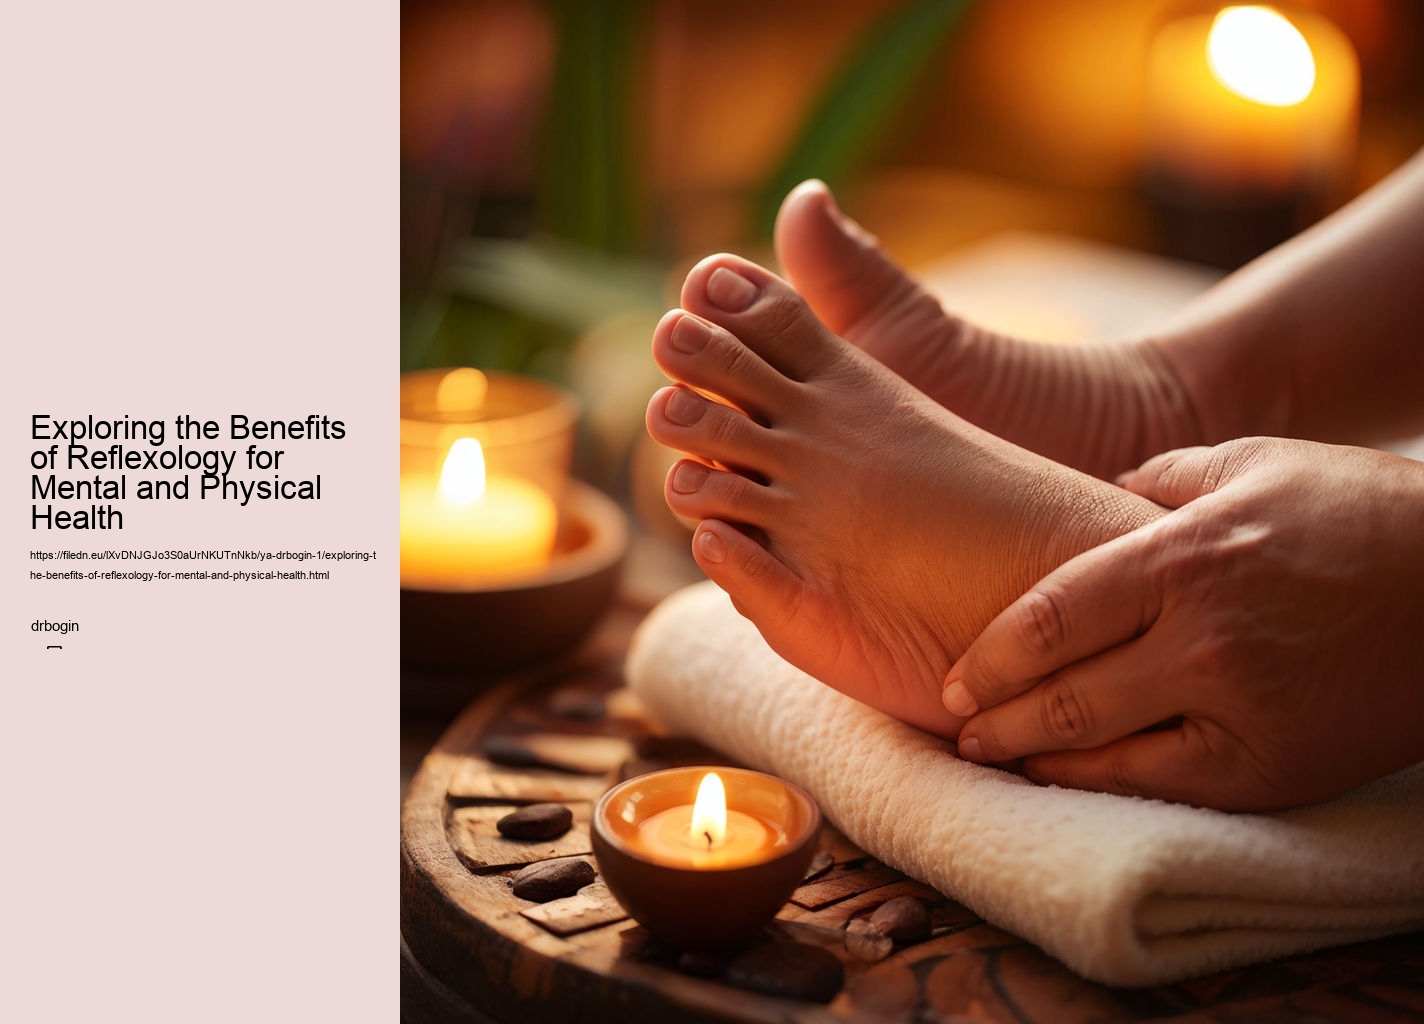 Exploring the Benefits of Reflexology for Mental and Physical Health